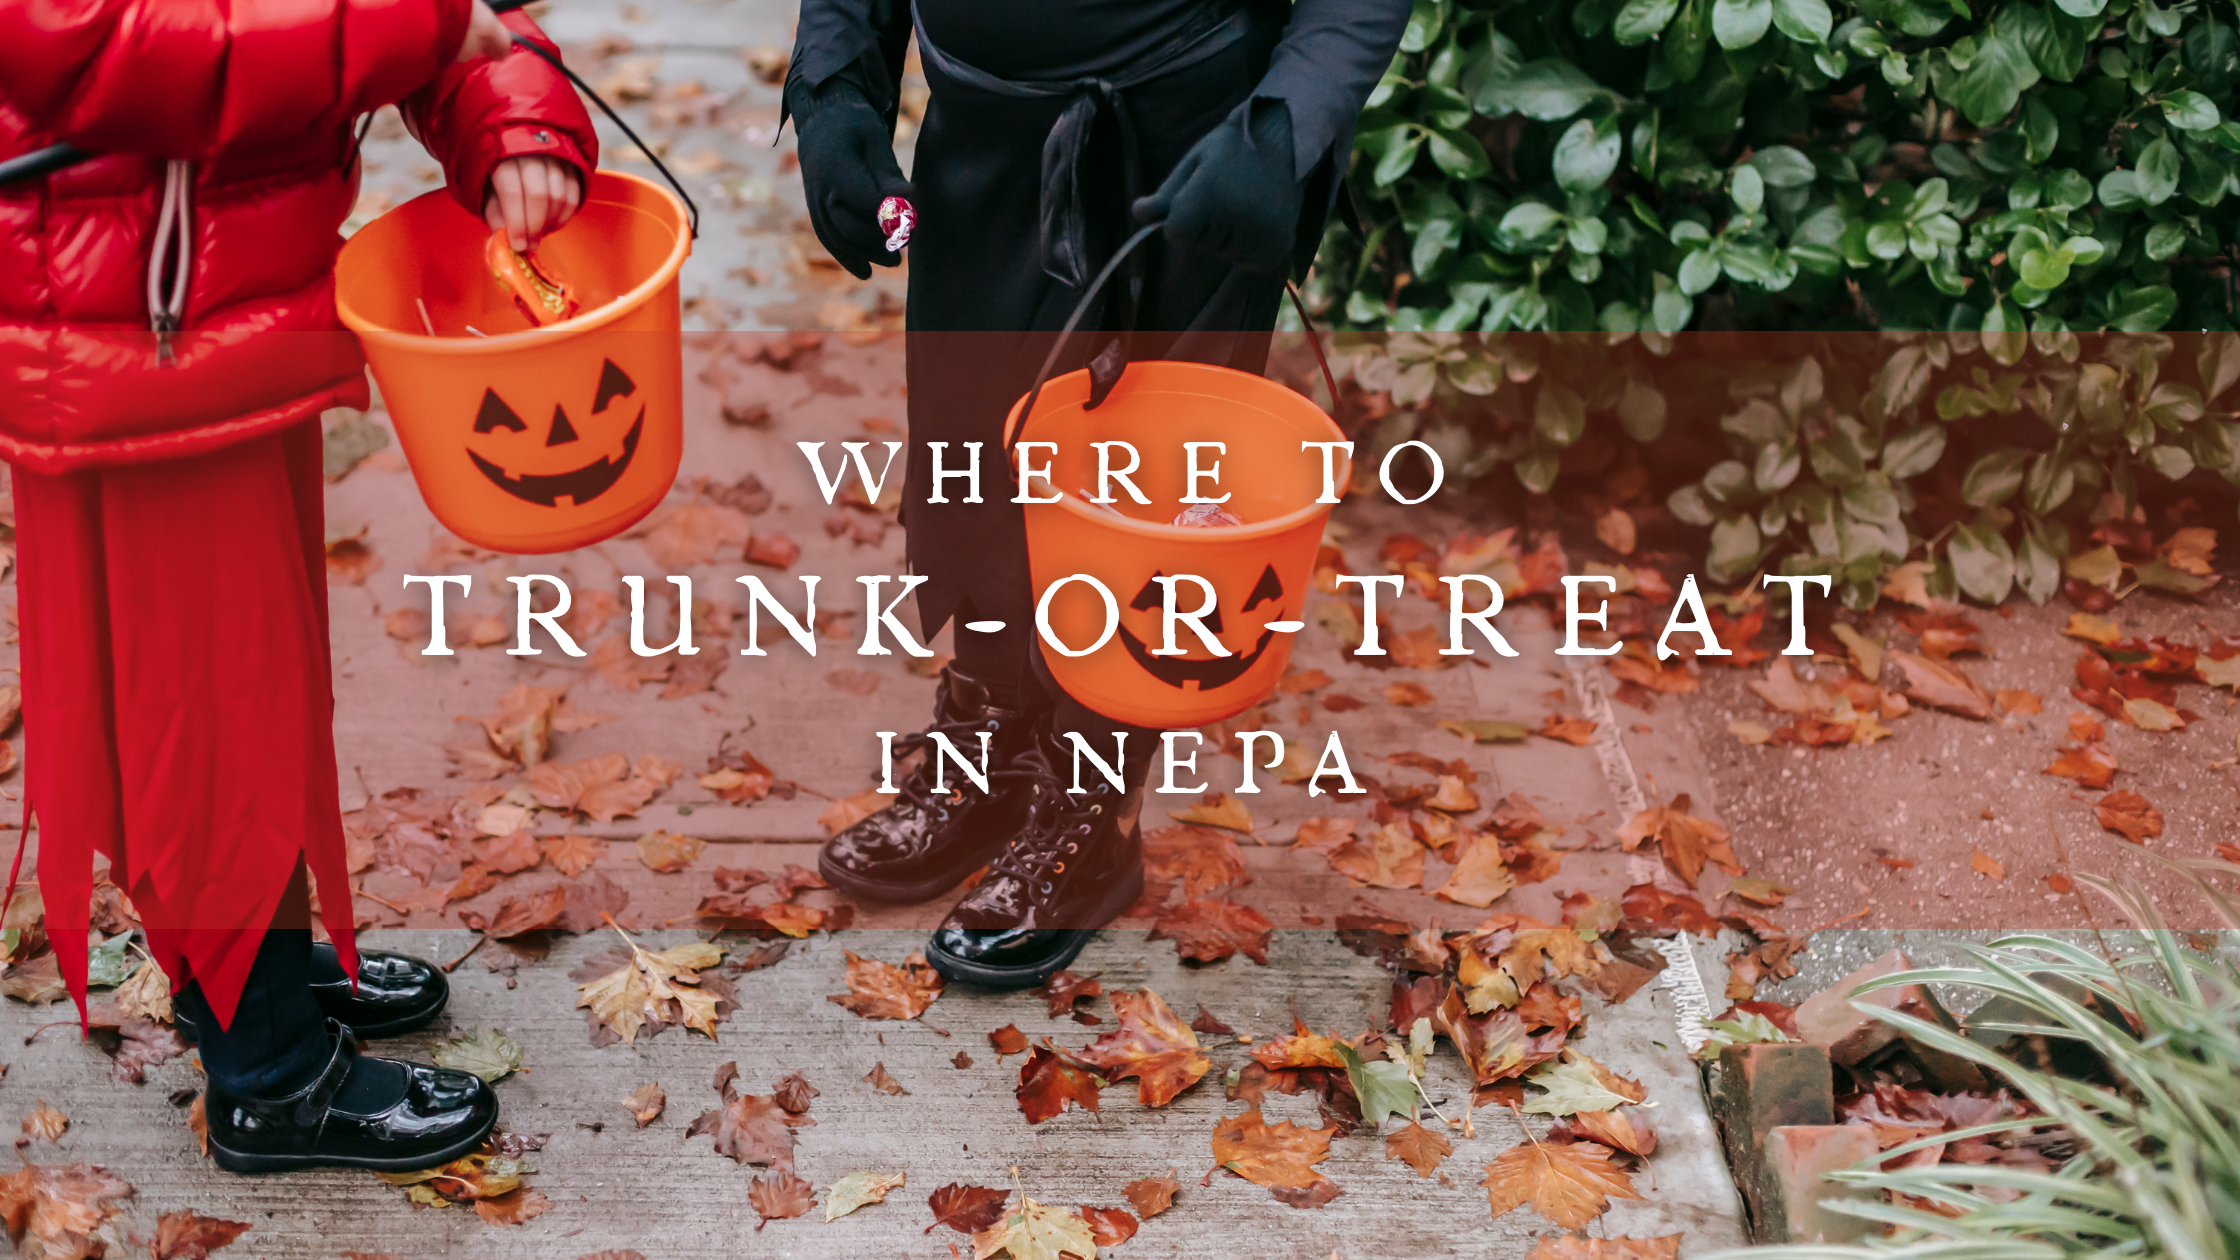 Where to Trunk-or-Treat in NEPA